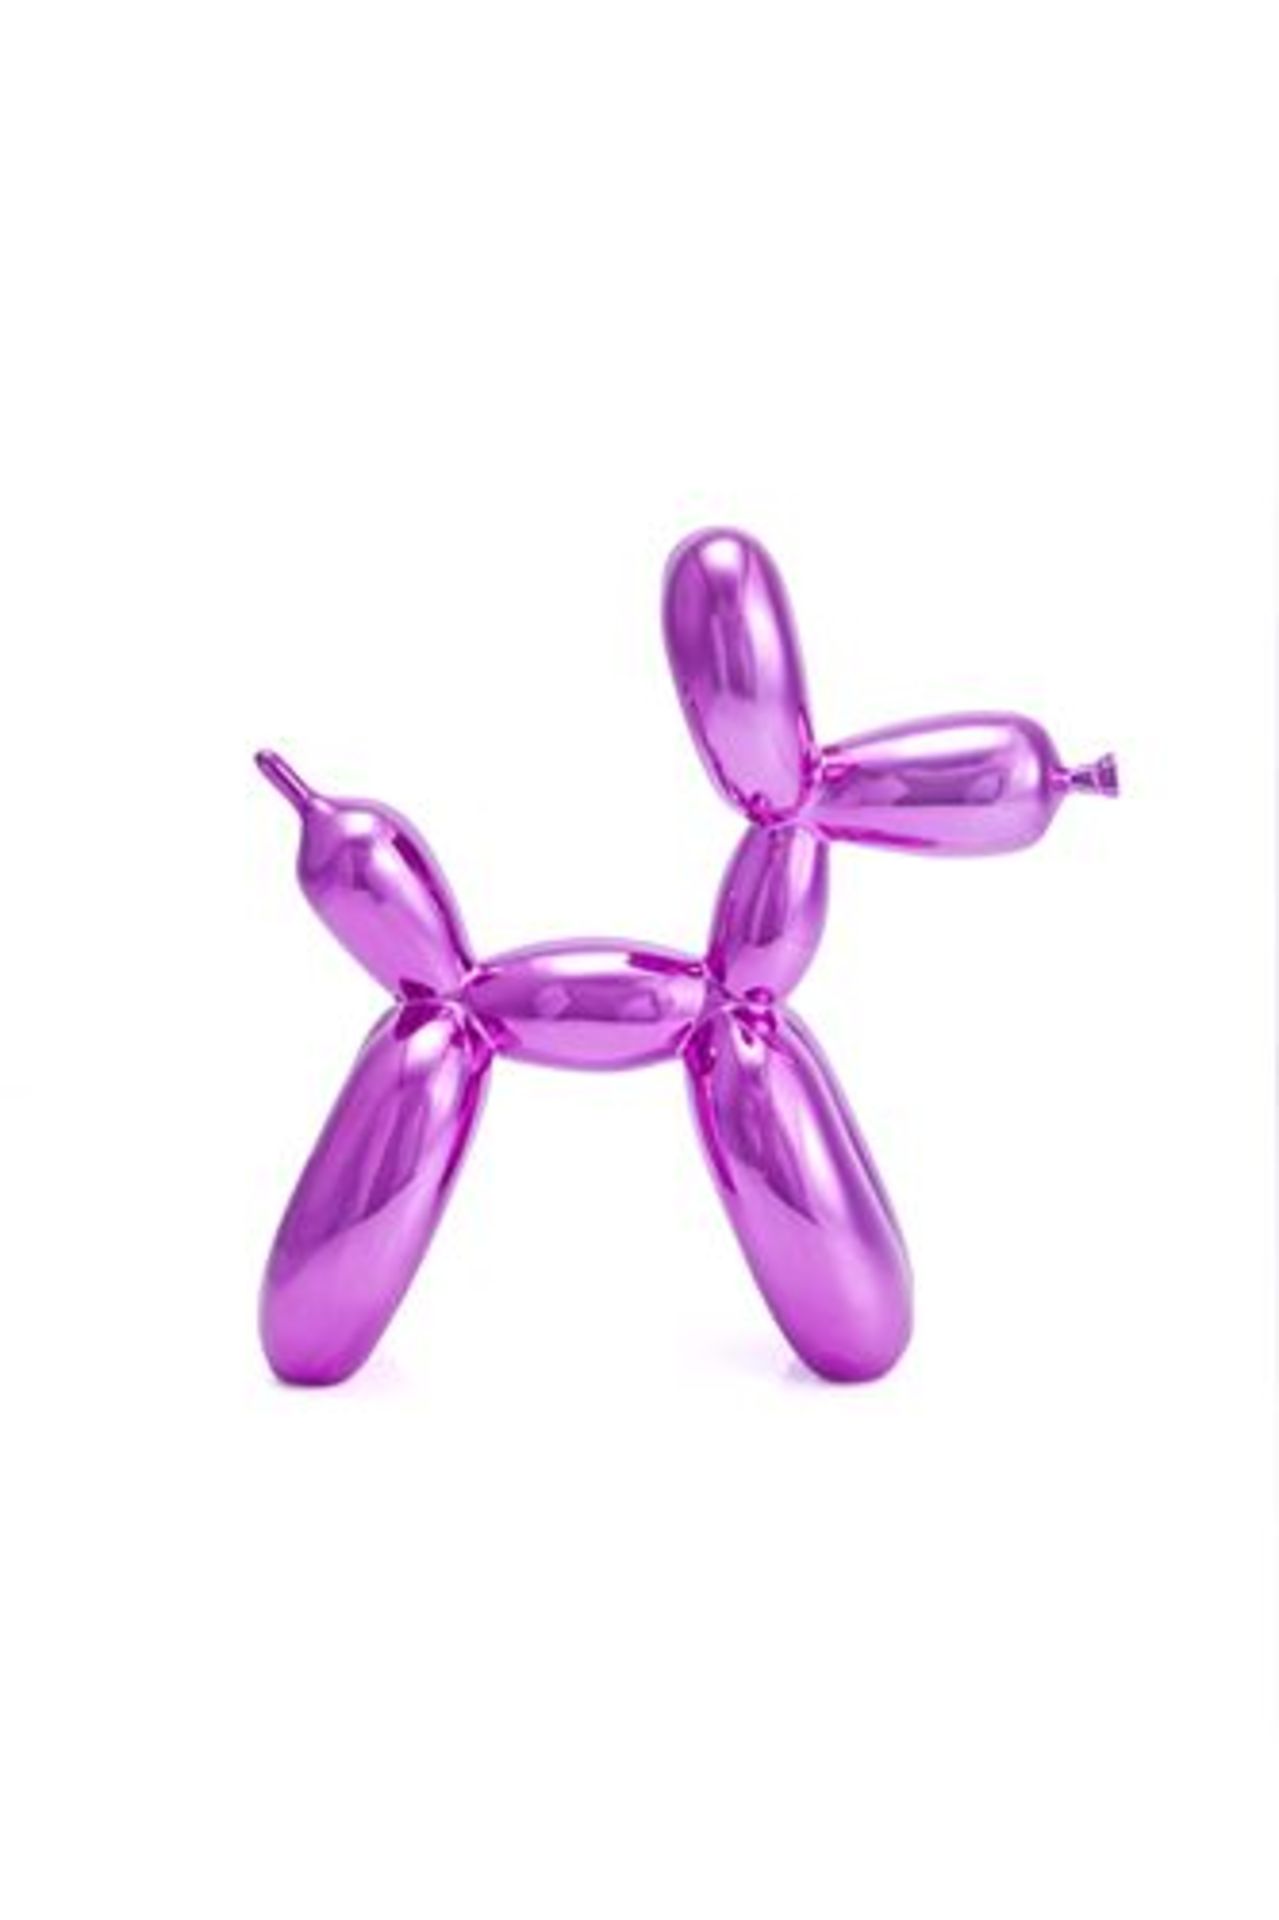 Jeff KOONS (After) Balloon Dog (Pink) An edition of the famous "Balloon Dog" by Jeff [...] - Bild 2 aus 4